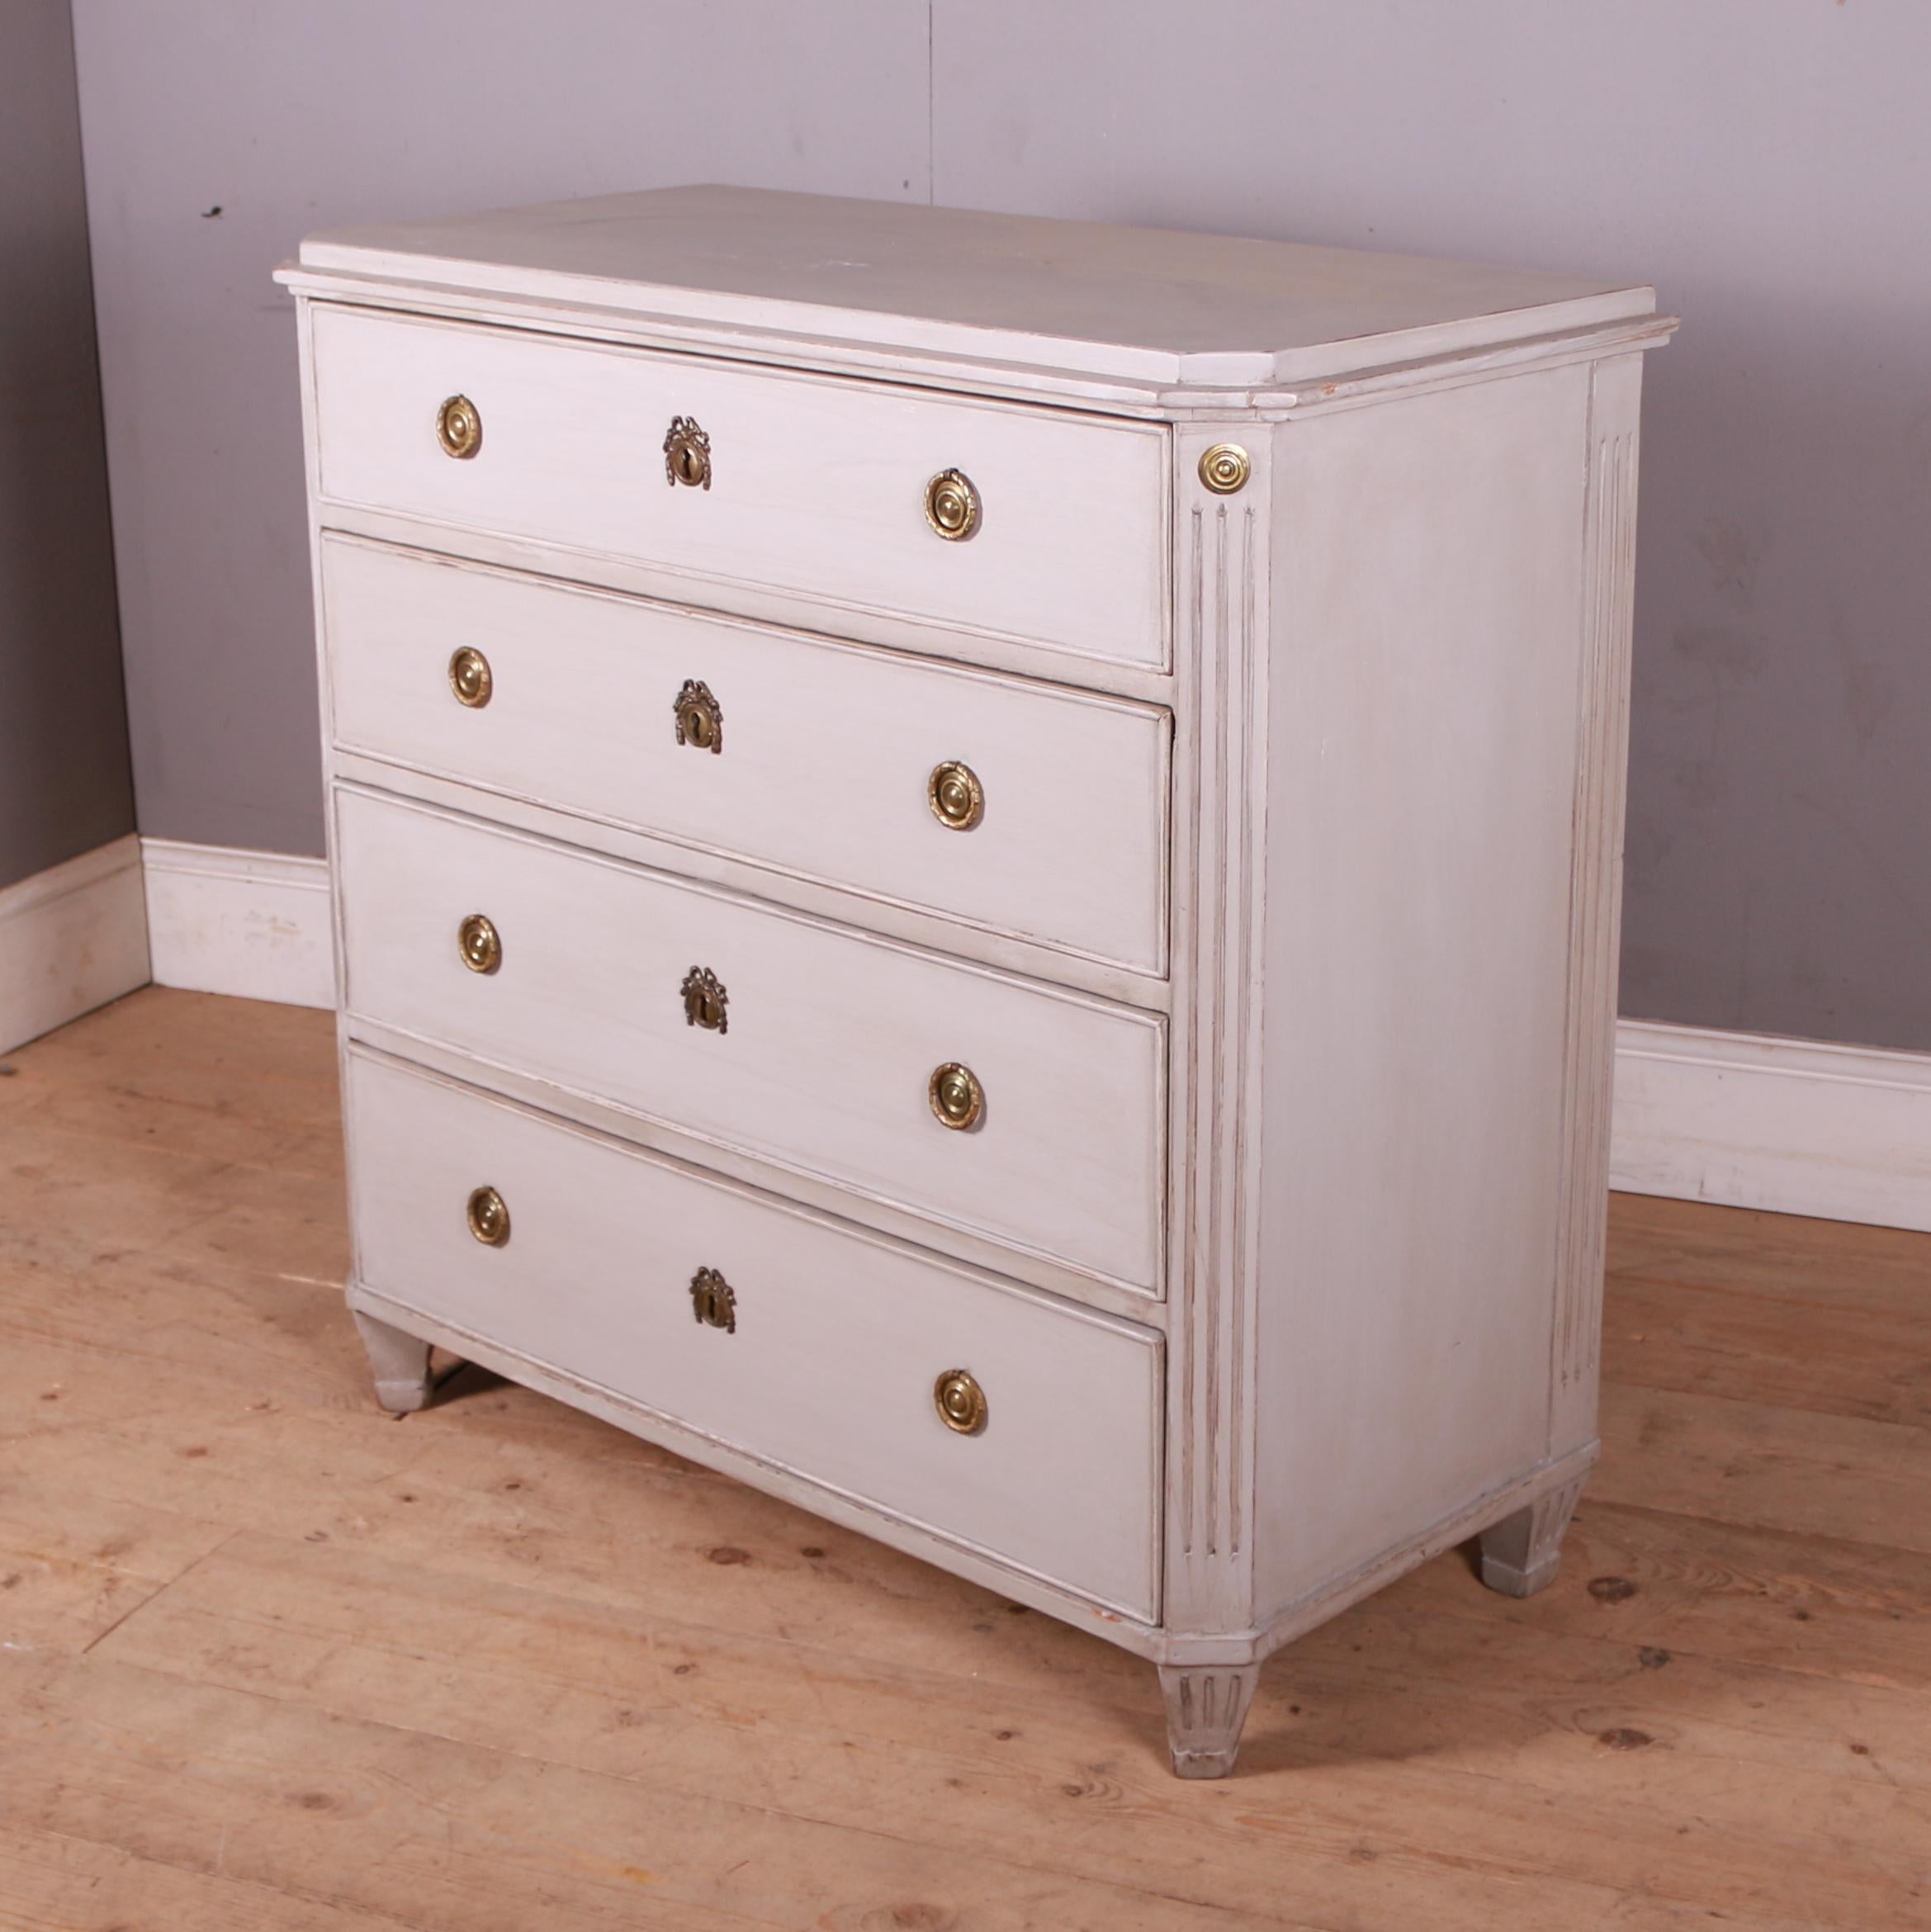 Late 19th C Gustavian style Swedish pine 4 drawer painted commode. 1890.

Dimensions
40 inches (102 cms) wide
19.5 inches (50 cms) deep
39 inches (99 cms) high.

      